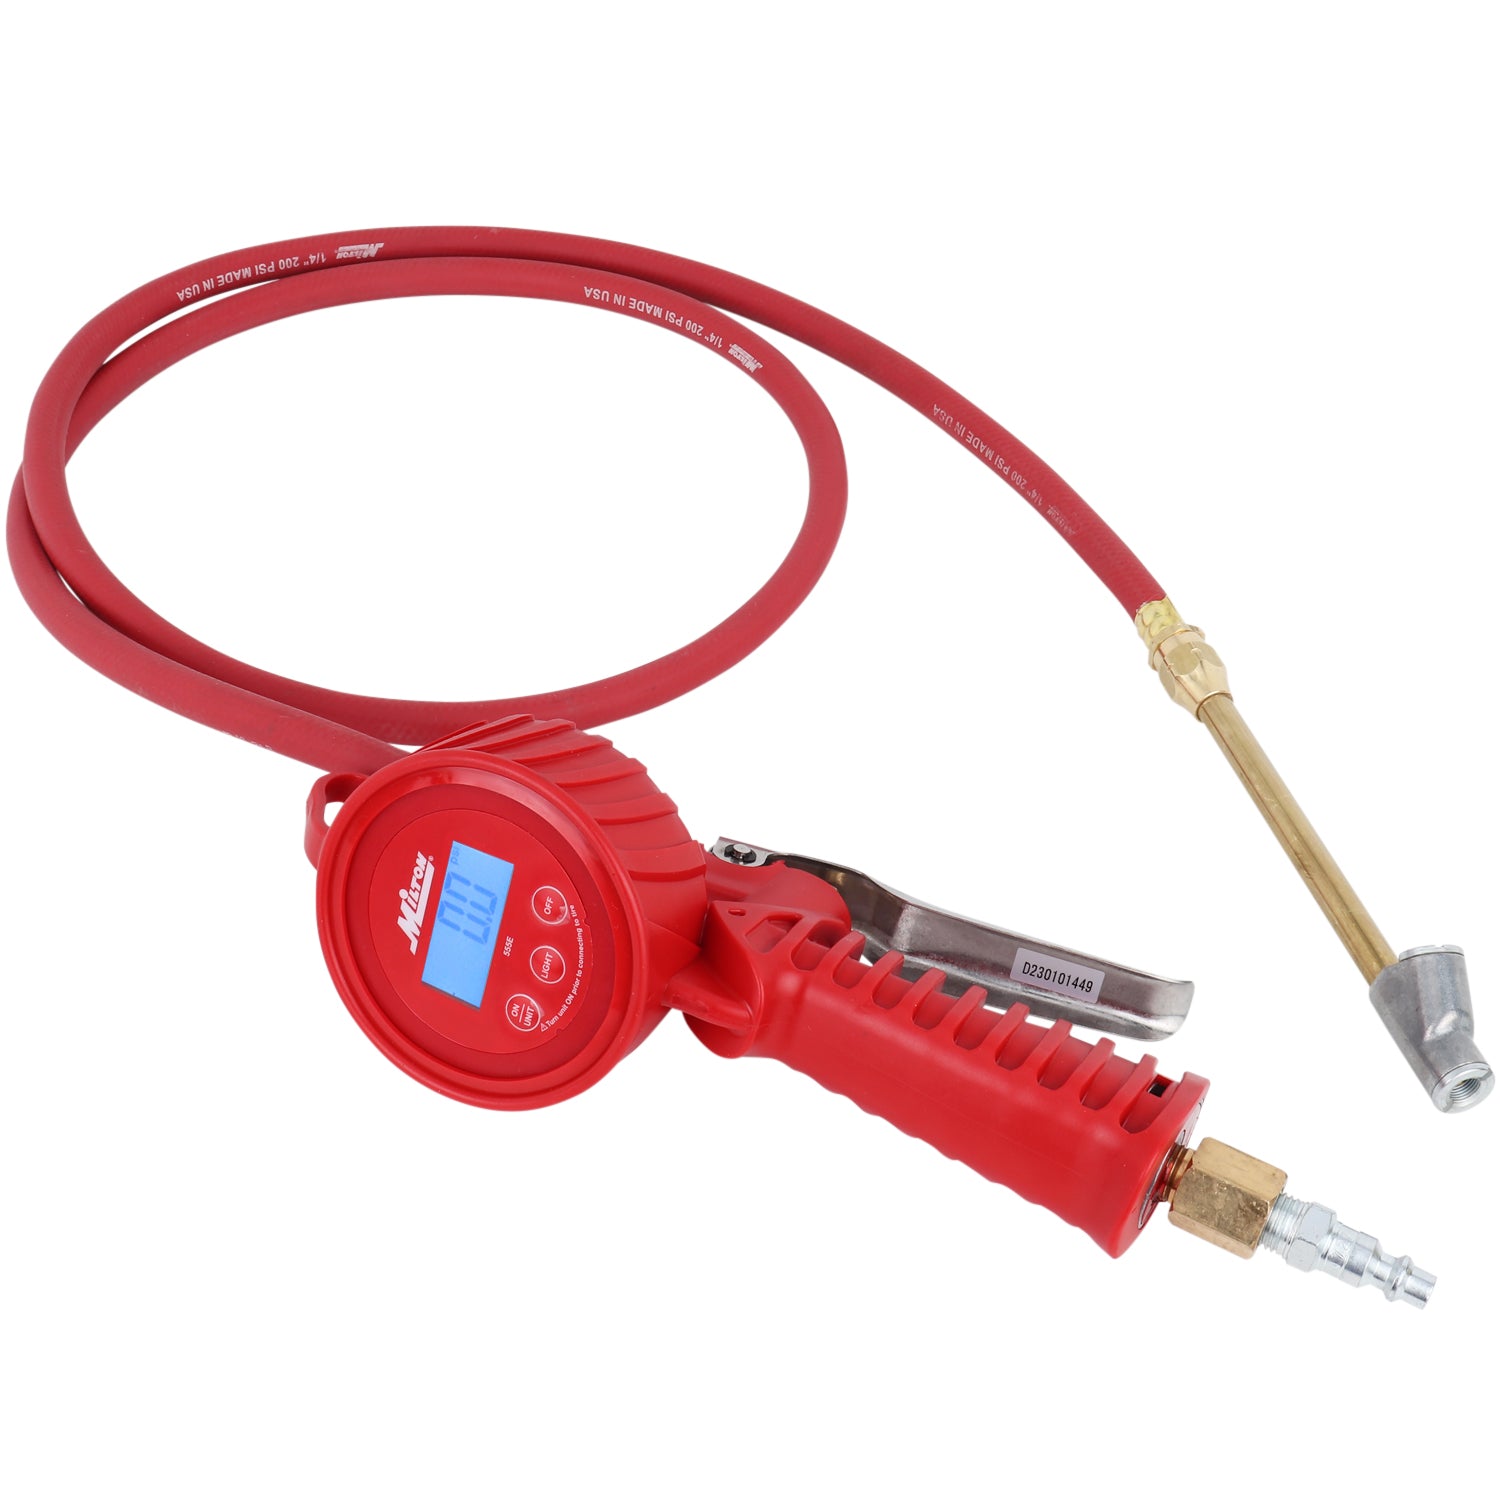 555e HD Digital Tire Inflator Gauge, 5' Extended Reach, measures from 5 to 150 PSI, ± 1 PSI Accuracy